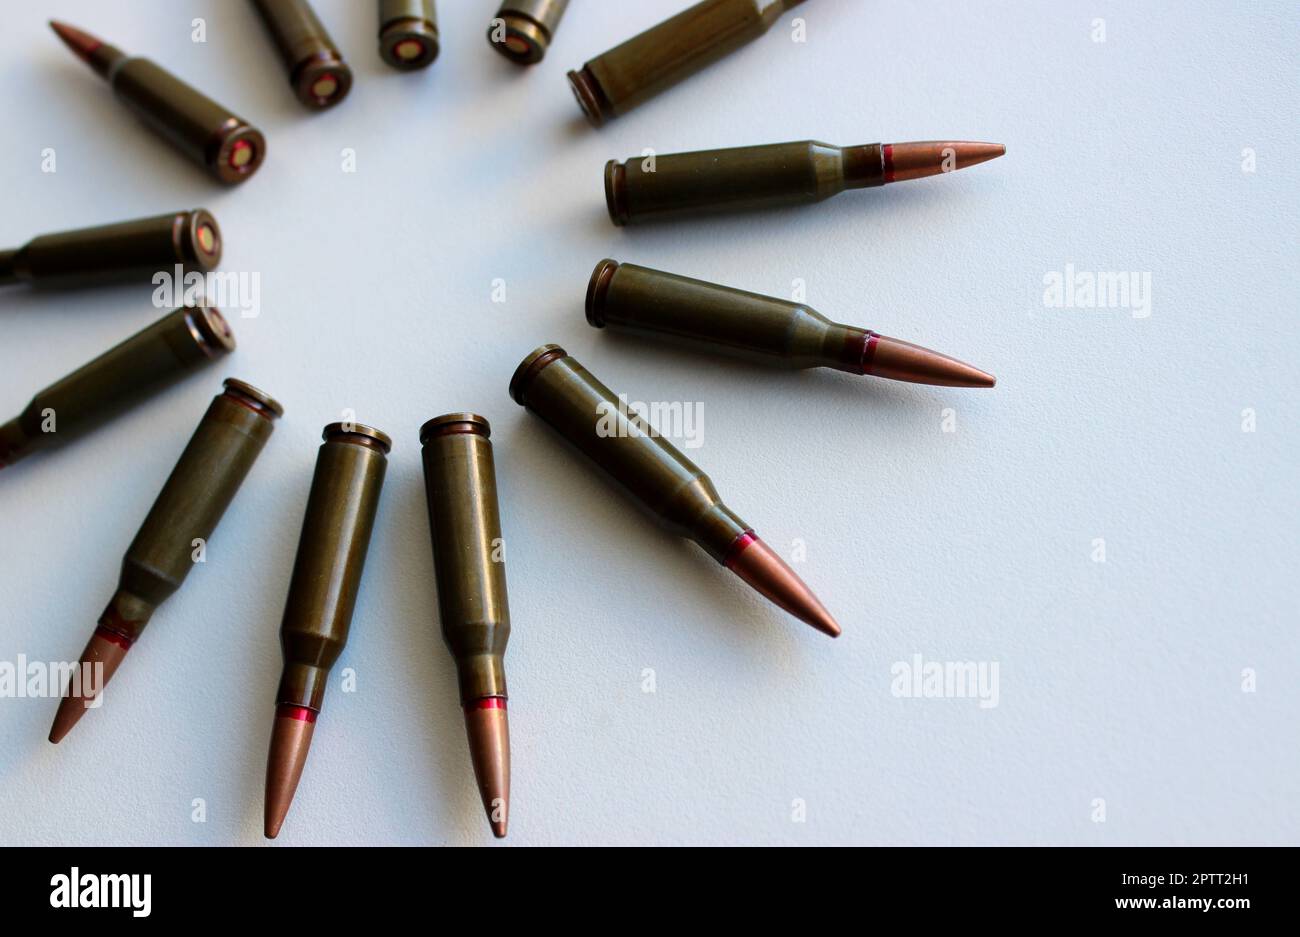 Part of an even circle of unitary cartridges laid out on a white background Stock Photo